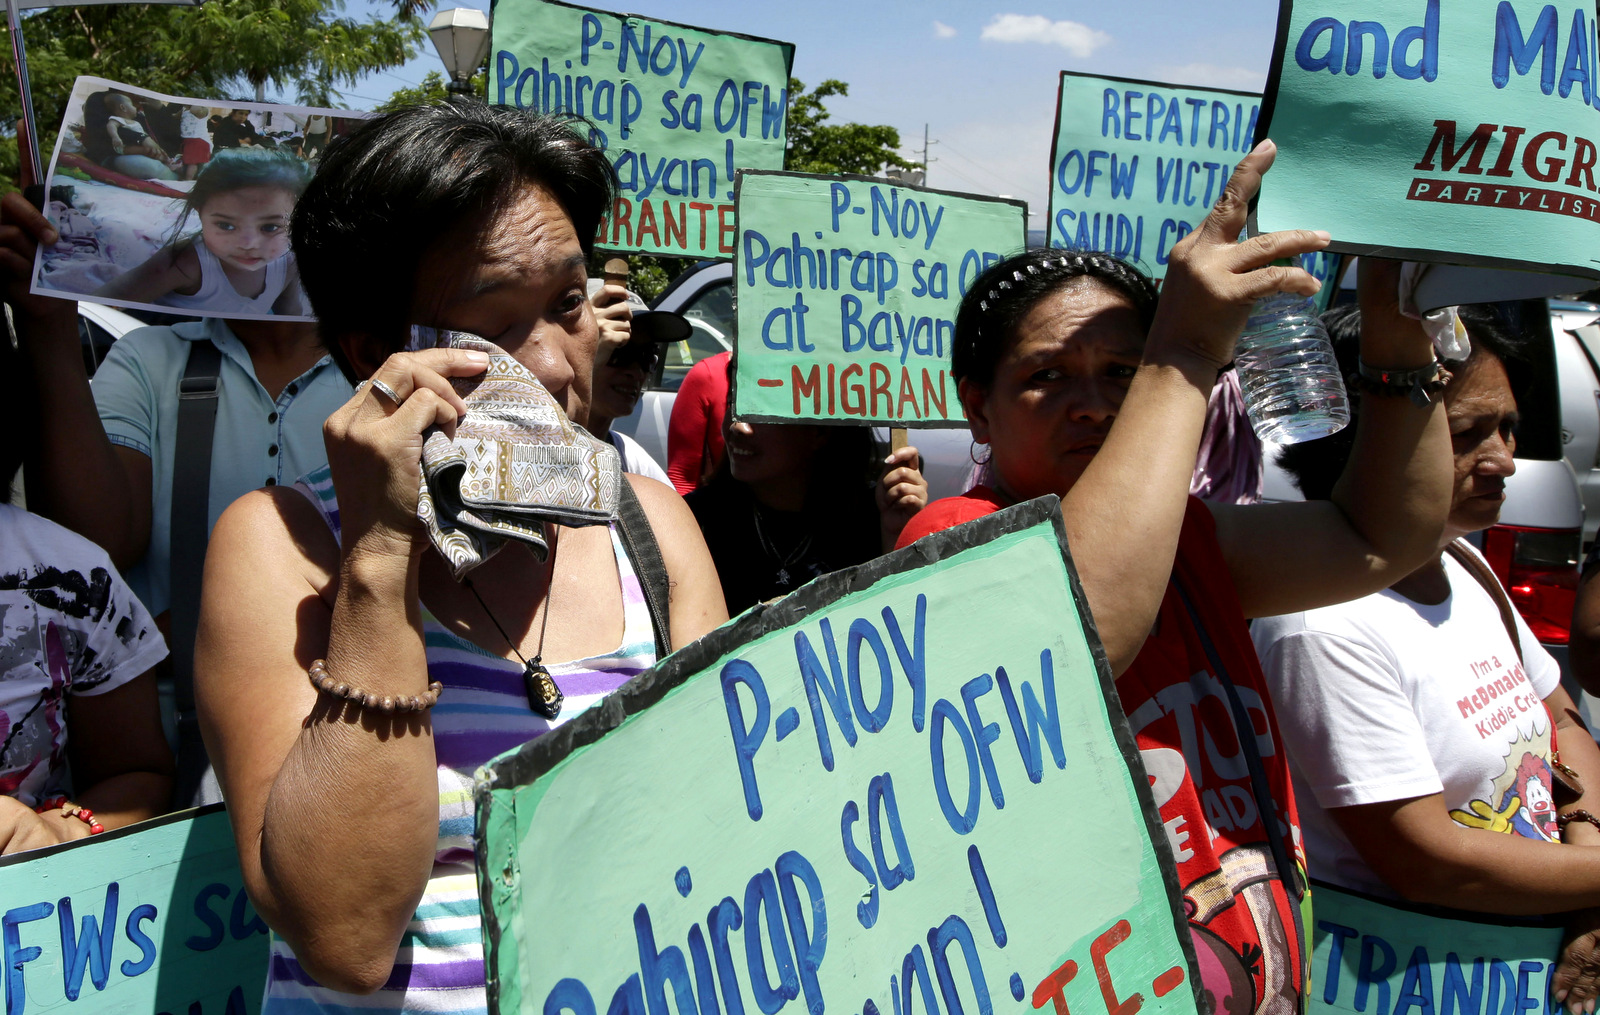 Relatives of OFWs (Overseas Filipino Workers) display placards as they pitch their tent to begin their planned three-day camp-out at the Department of Foreign Affairs in Manila, Philippines, Monday April 29, 2013. The camp-out was organized in sympathy with more than 2,500 who pitched their tents in Jedda, Saudi Arabia to escape alleged crackdowns on undocument overseas workers by the Saudi government. (AP/Bullit Marquez)